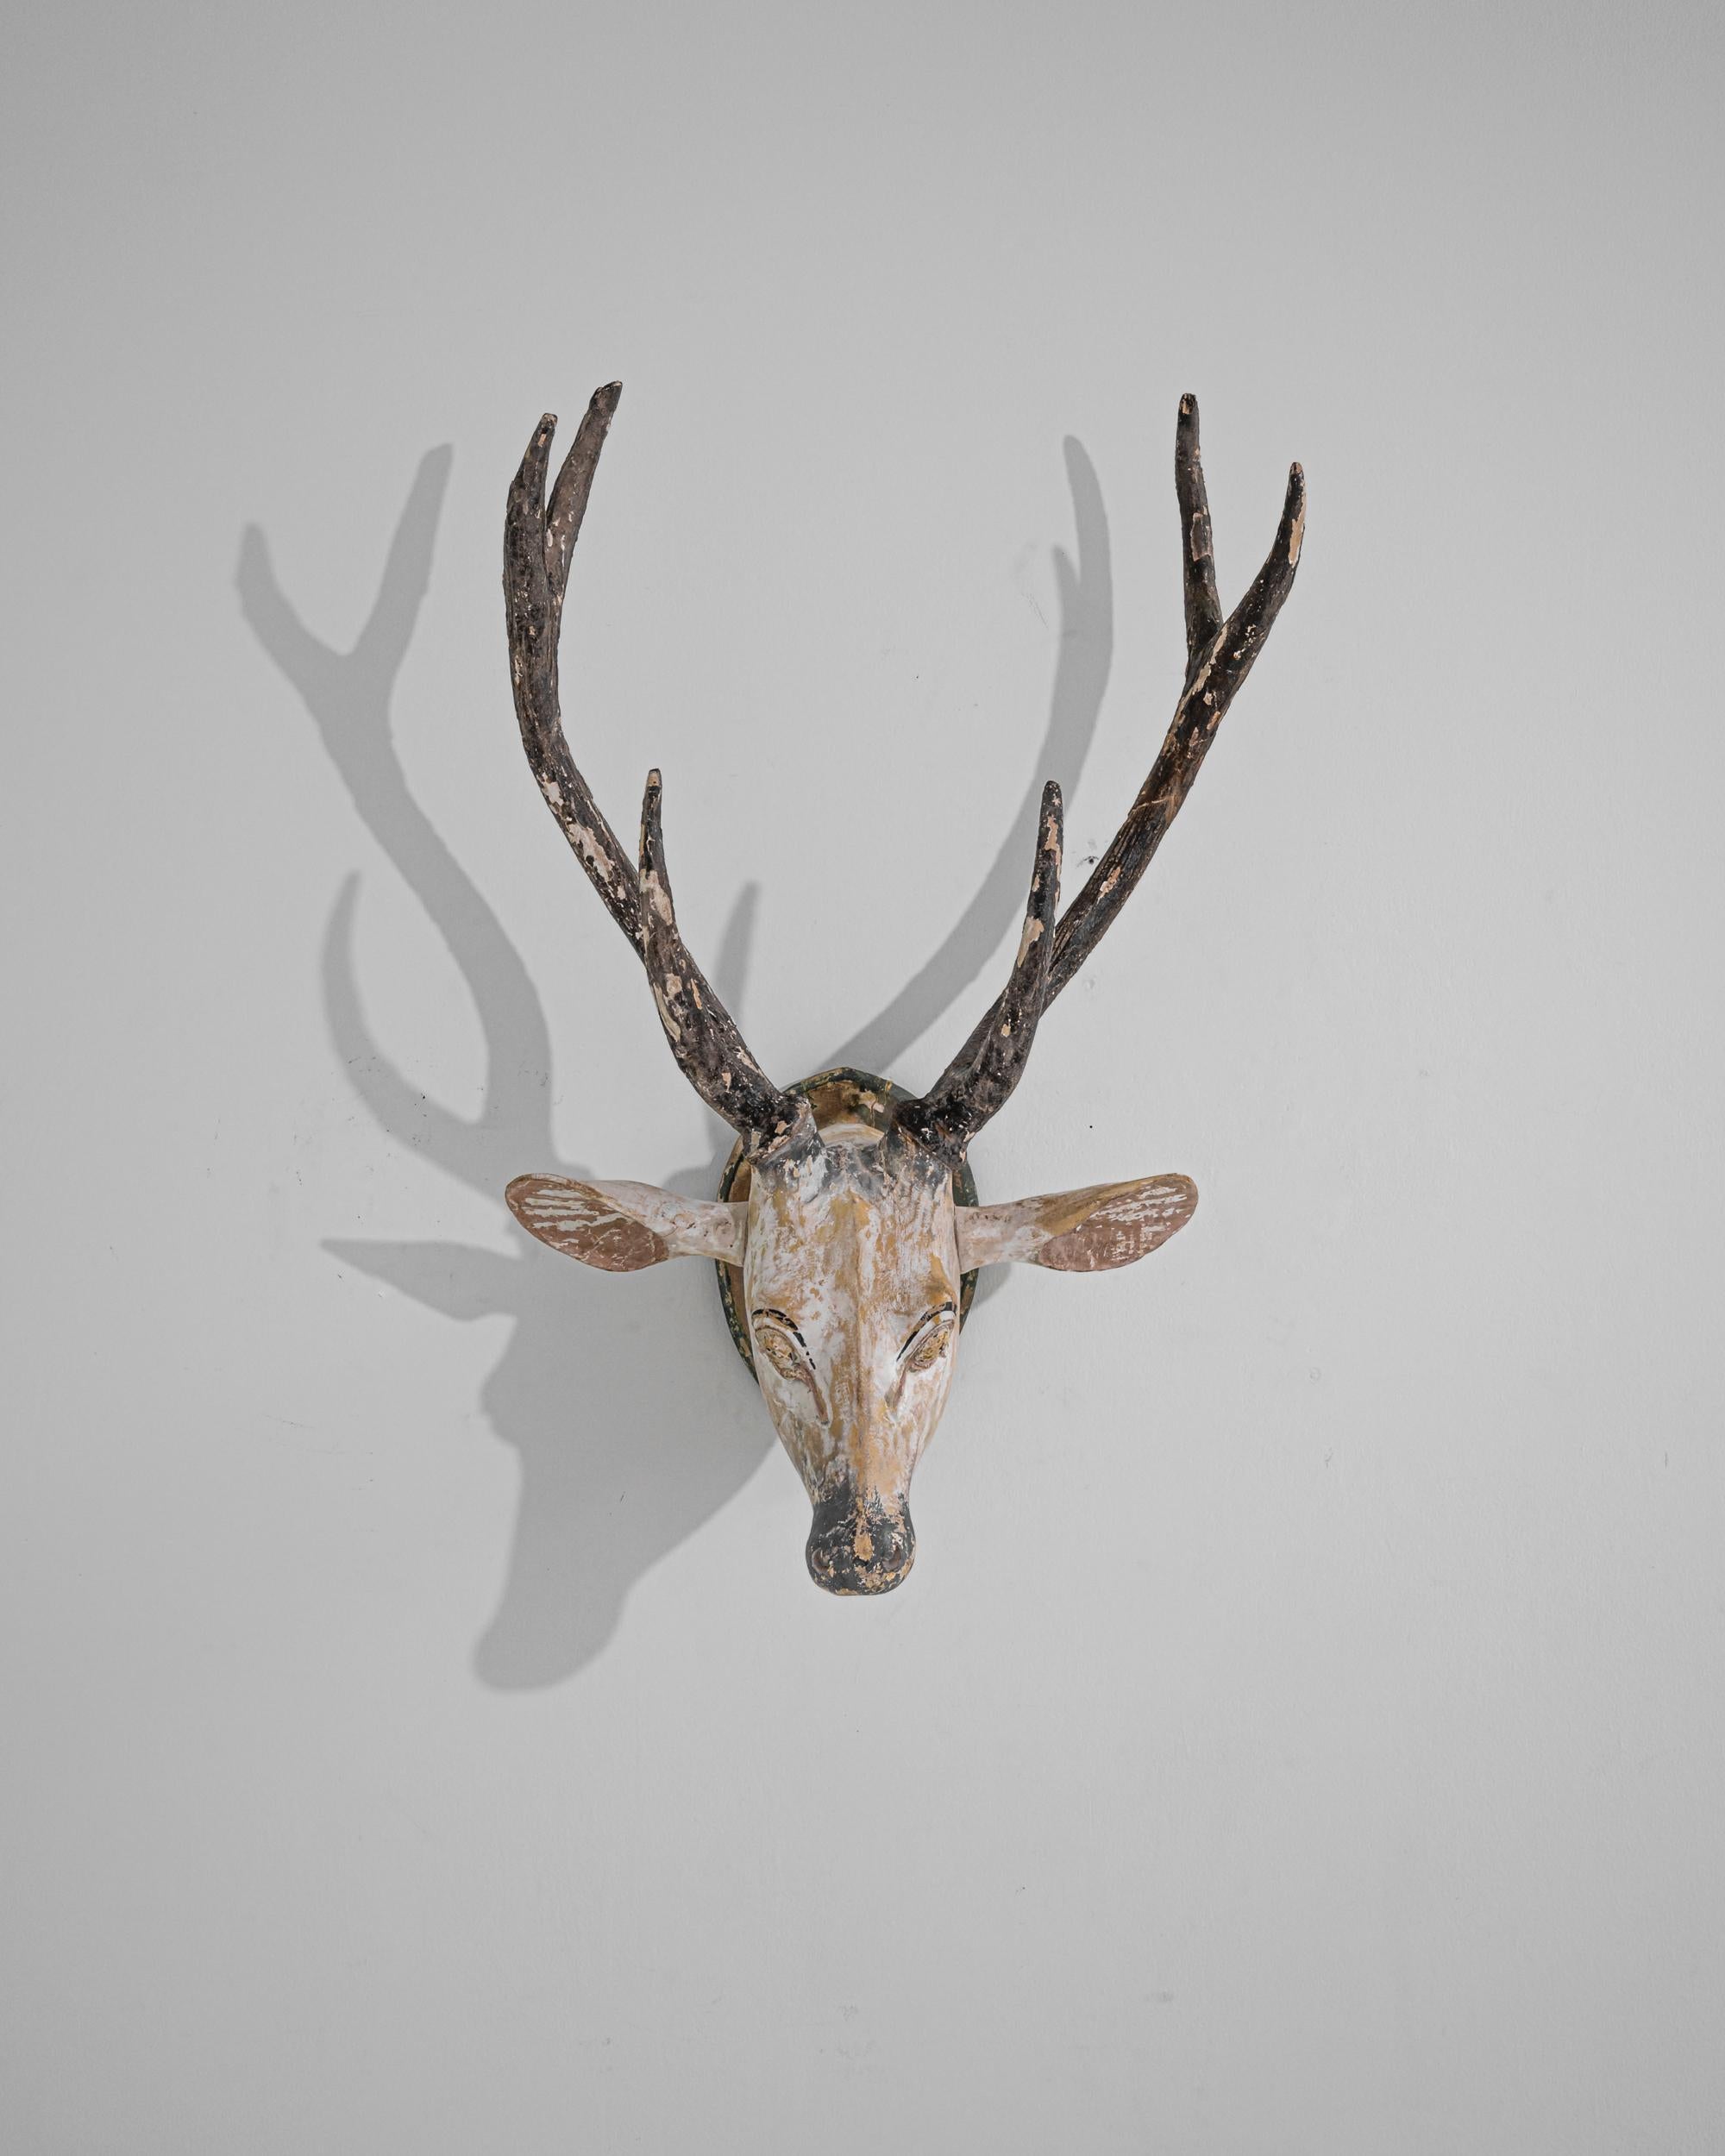 This rustic piece evokes the atmosphere of a hunting lodge in the Scandinavian forest. Made in the early 20th century, the carved form depicts a stag’s head, mounted on a wooden plaque. The shape is realistic, indicating that the craftsman was